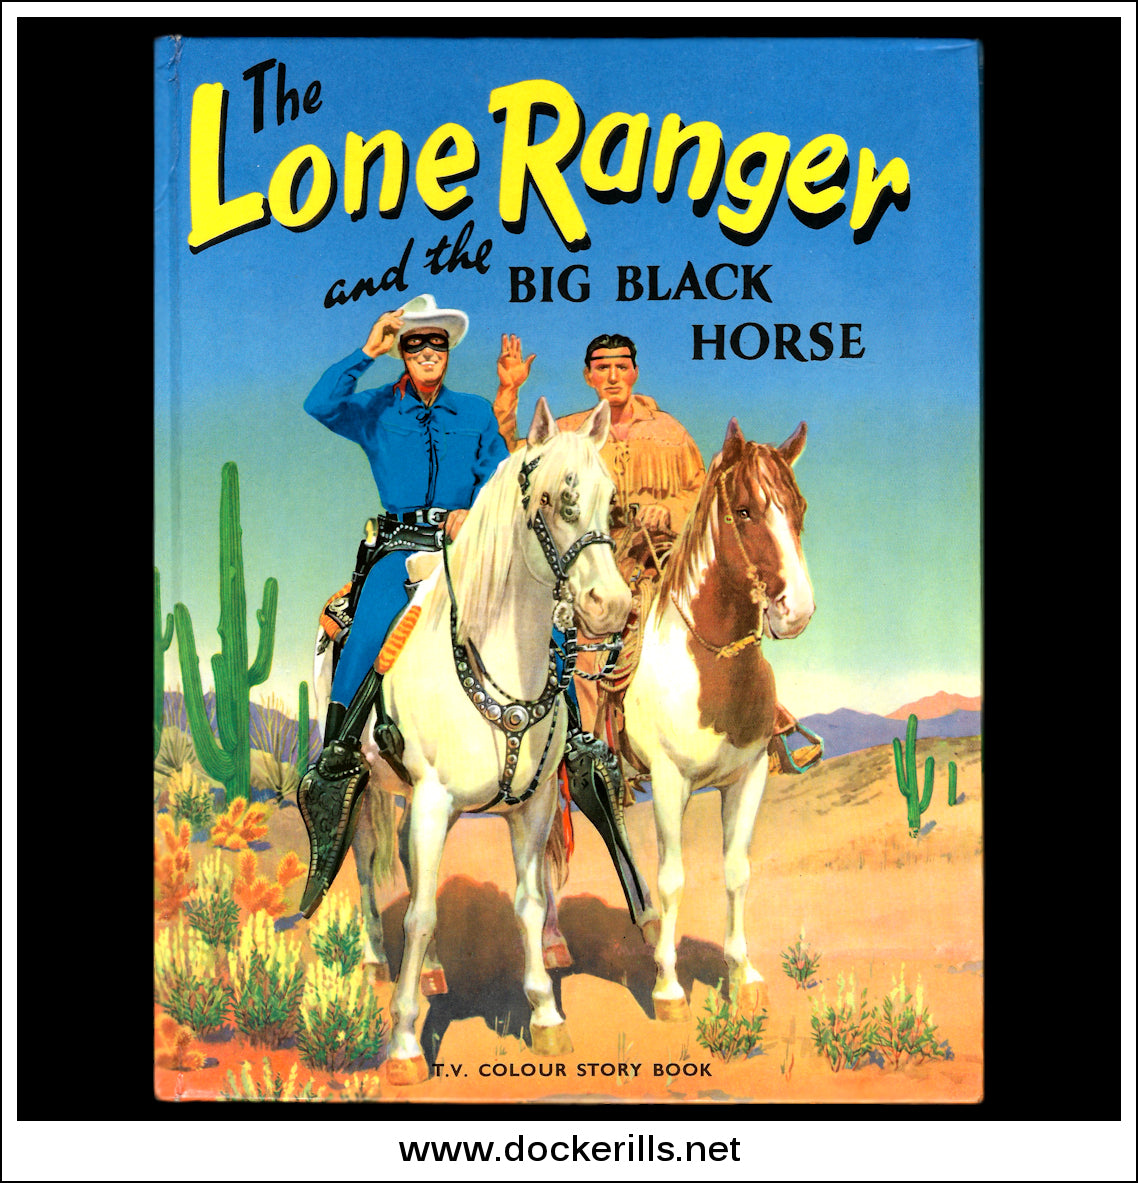 the lone ranger was black